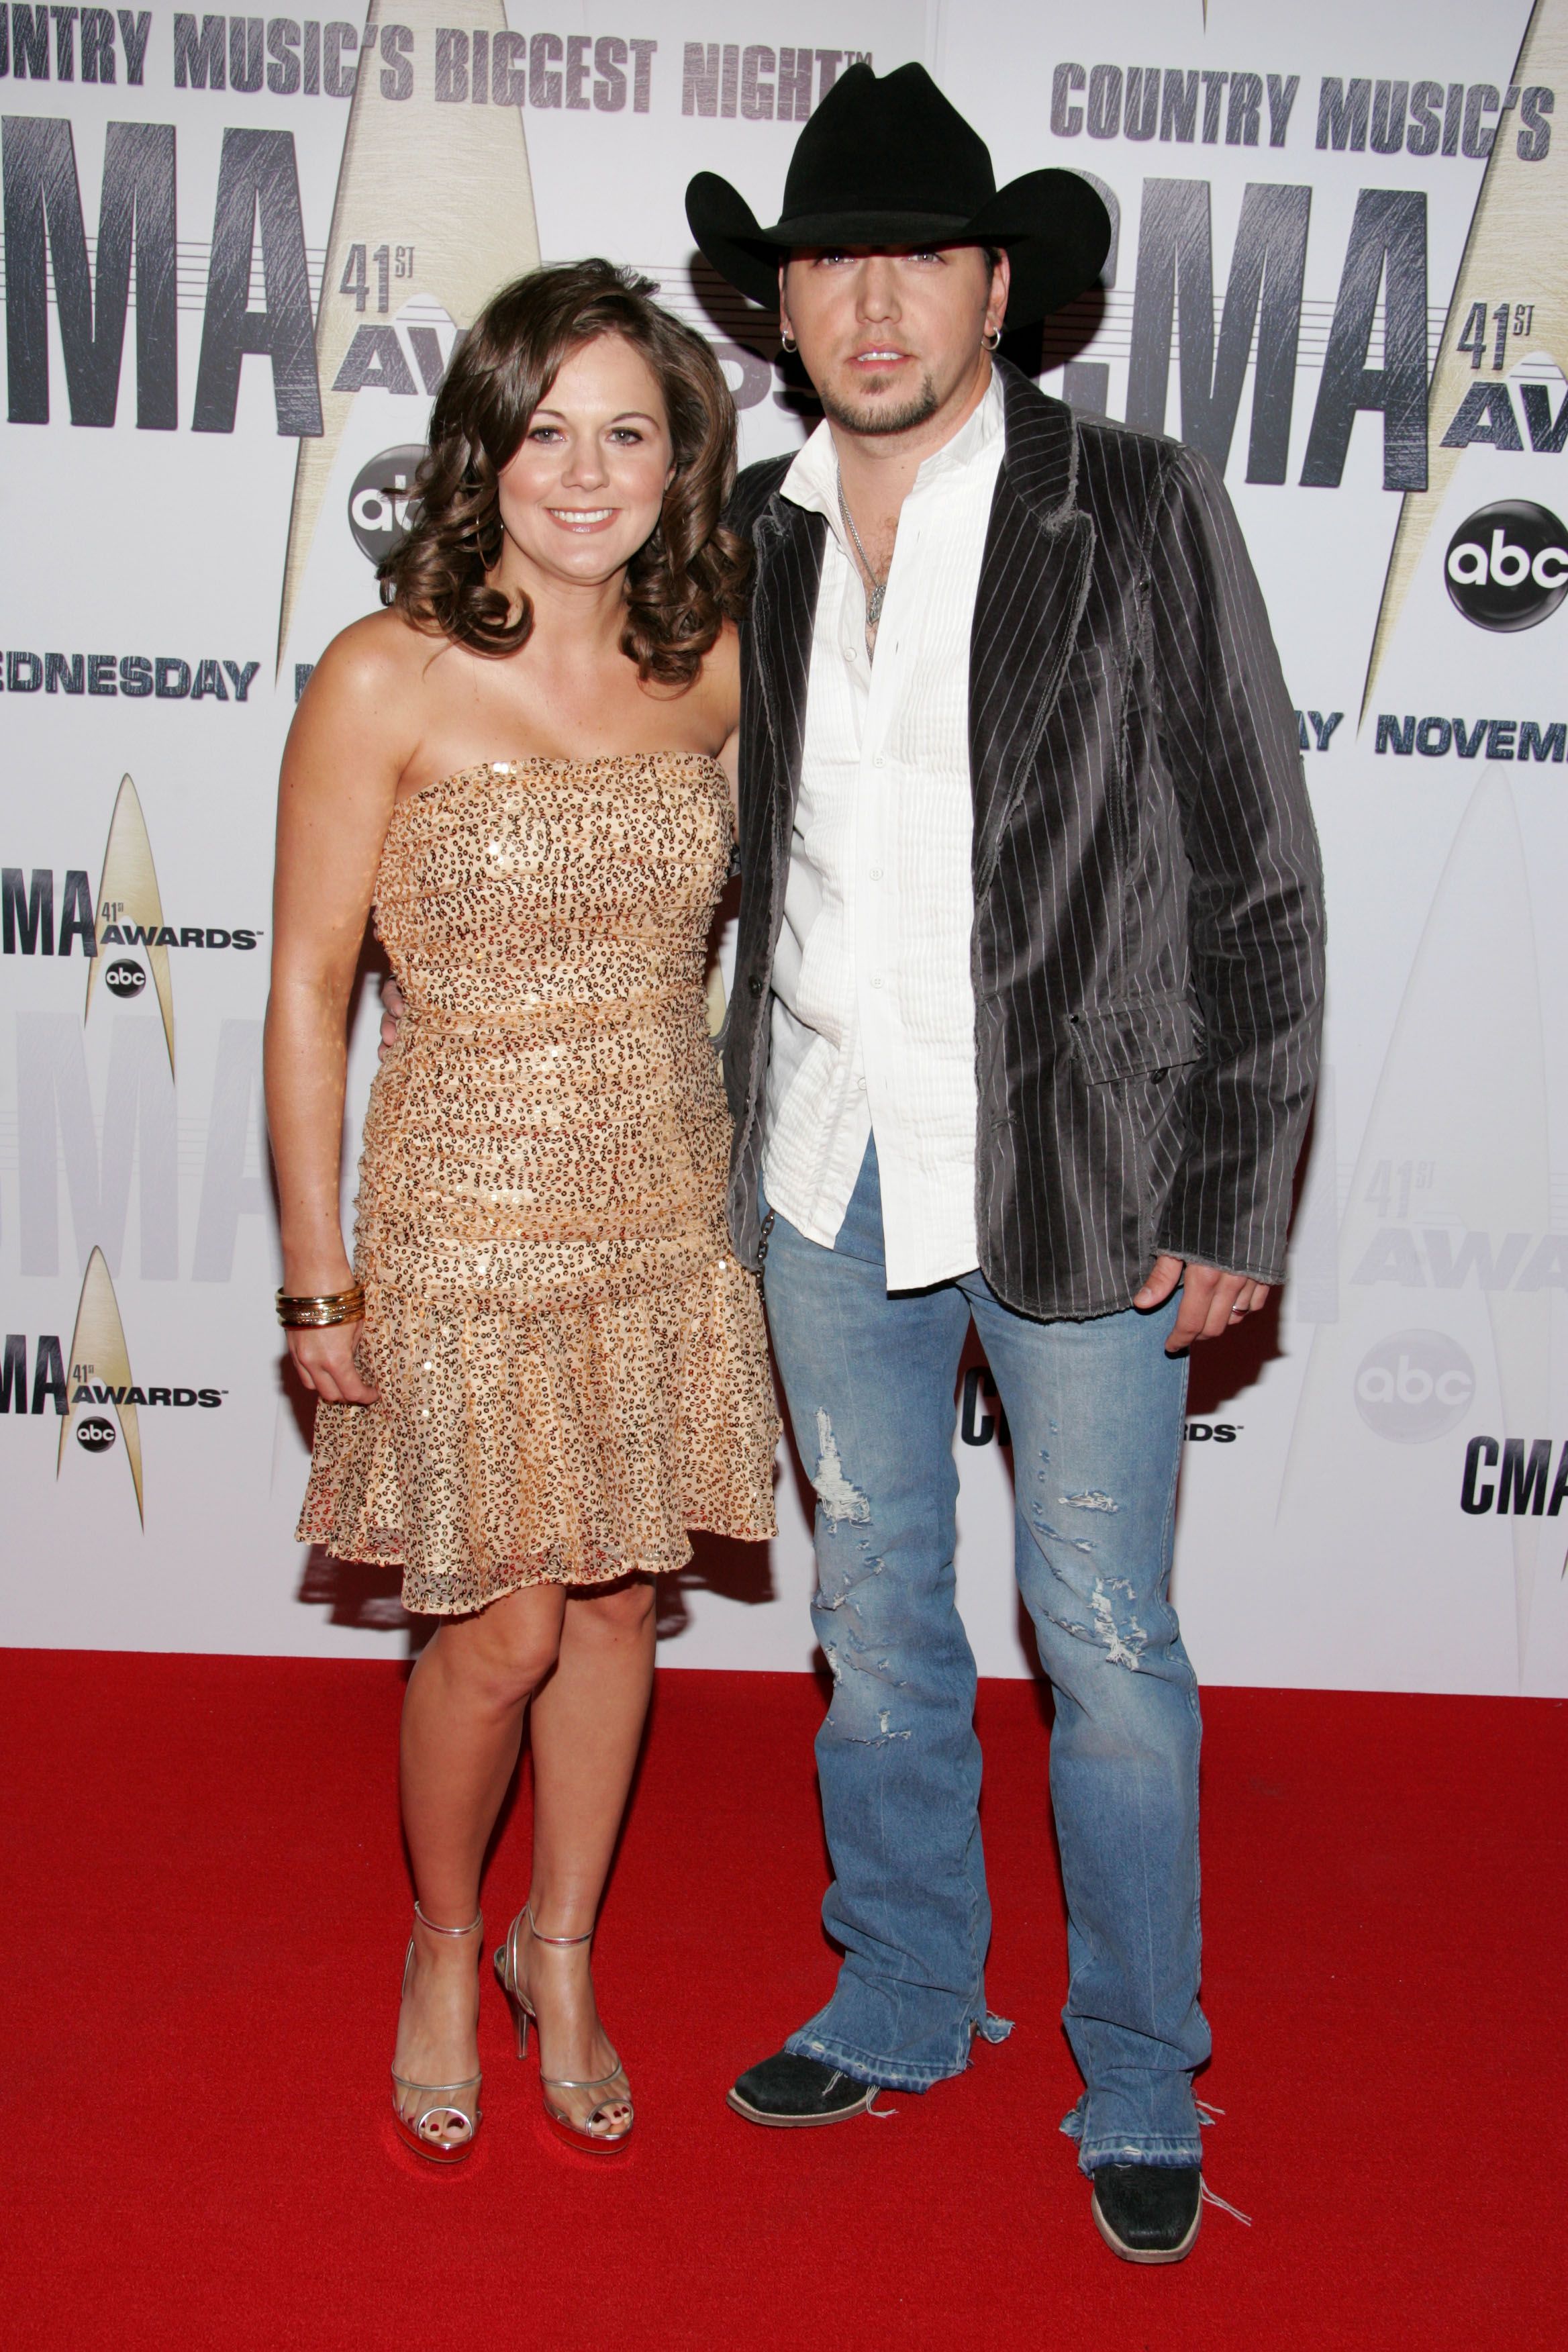 Jason Aldean and Jessica Ussery at the 41st Annual CMA Awards at the Sommet Center on November 7, 2007 in Nashville, Tennessee. | Source: Getty Images